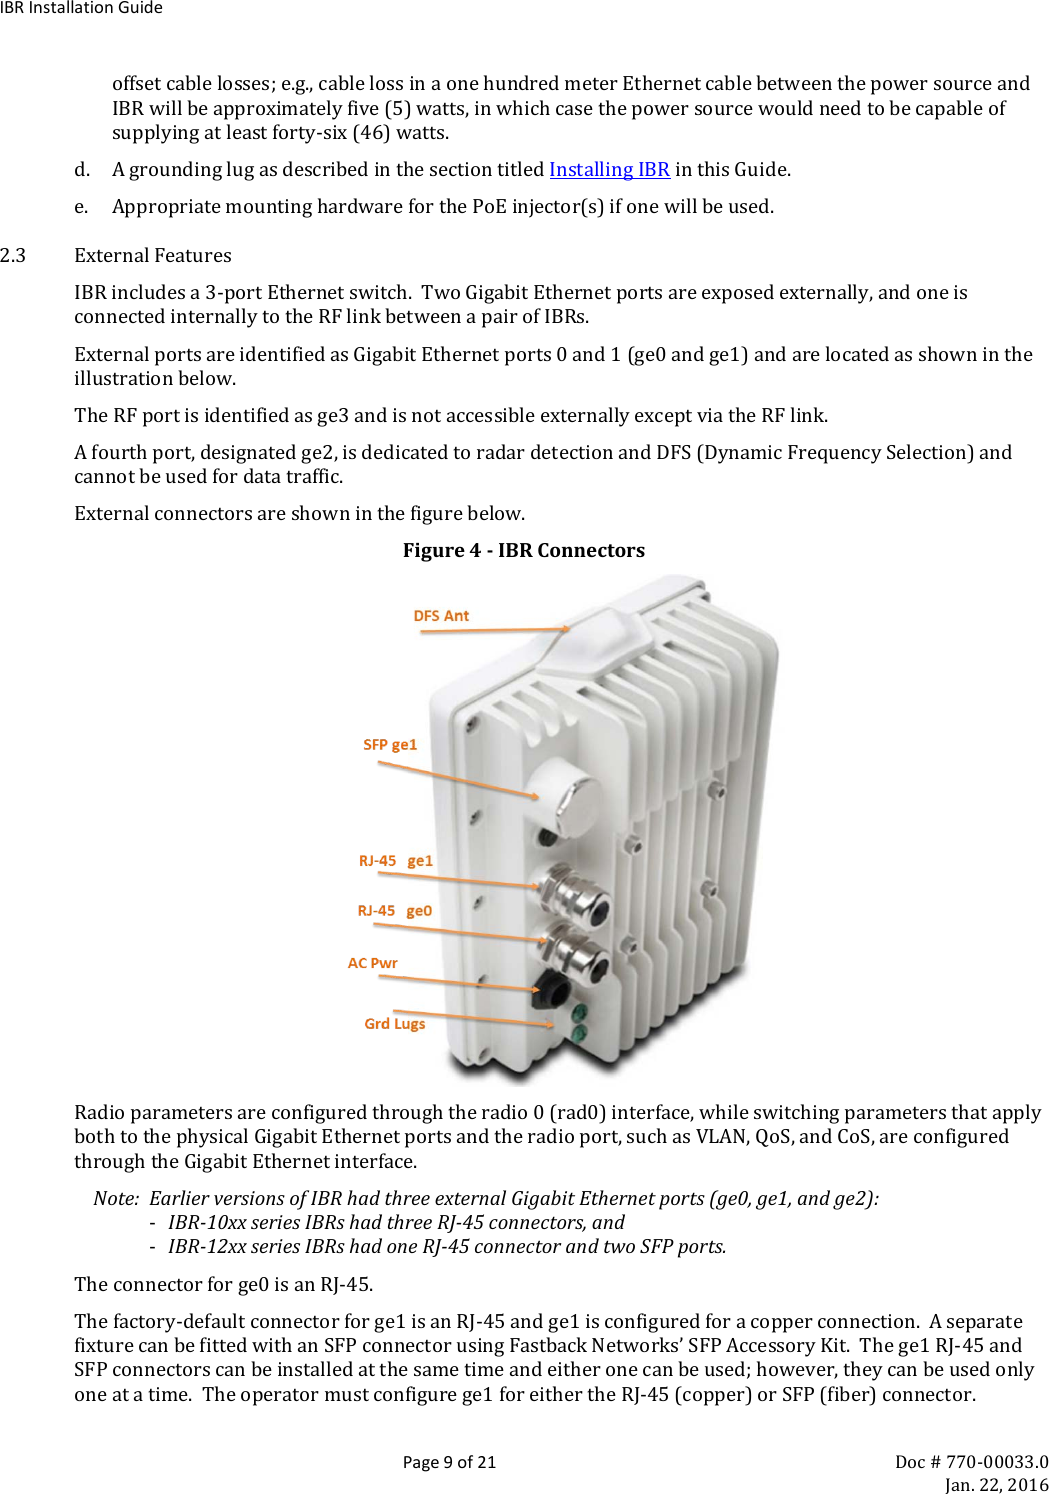 IBR Installation Guide  Page 9 of 21 Doc # 770-00033.0     Jan. 22, 2016 offset cable losses; e.g., cable loss in a one hundred meter Ethernet cable between the power source and IBR will be approximately five (5) watts, in which case the power source would need to be capable of supplying at least forty-six (46) watts. d. A grounding lug as described in the section titled Installing IBR in this Guide. e. Appropriate mounting hardware for the PoE injector(s) if one will be used. 2.3 External Features IBR includes a 3-port Ethernet switch.  Two Gigabit Ethernet ports are exposed externally, and one is connected internally to the RF link between a pair of IBRs.   External ports are identified as Gigabit Ethernet ports 0 and 1 (ge0 and ge1) and are located as shown in the illustration below. The RF port is identified as ge3 and is not accessible externally except via the RF link. A fourth port, designated ge2, is dedicated to radar detection and DFS (Dynamic Frequency Selection) and cannot be used for data traffic. External connectors are shown in the figure below. Figure 4 - IBR Connectors  Radio parameters are configured through the radio 0 (rad0) interface, while switching parameters that apply both to the physical Gigabit Ethernet ports and the radio port, such as VLAN, QoS, and CoS, are configured through the Gigabit Ethernet interface.   Note:  Earlier versions of IBR had three external Gigabit Ethernet ports (ge0, ge1, and ge2): - IBR-10xx series IBRs had three RJ-45 connectors, and - IBR-12xx series IBRs had one RJ-45 connector and two SFP ports. The connector for ge0 is an RJ-45. The factory-default connector for ge1 is an RJ-45 and ge1 is configured for a copper connection.  A separate fixture can be fitted with an SFP connector using Fastback Networks’ SFP Accessory Kit.  The ge1 RJ-45 and SFP connectors can be installed at the same time and either one can be used; however, they can be used only one at a time.  The operator must configure ge1 for either the RJ-45 (copper) or SFP (fiber) connector. 